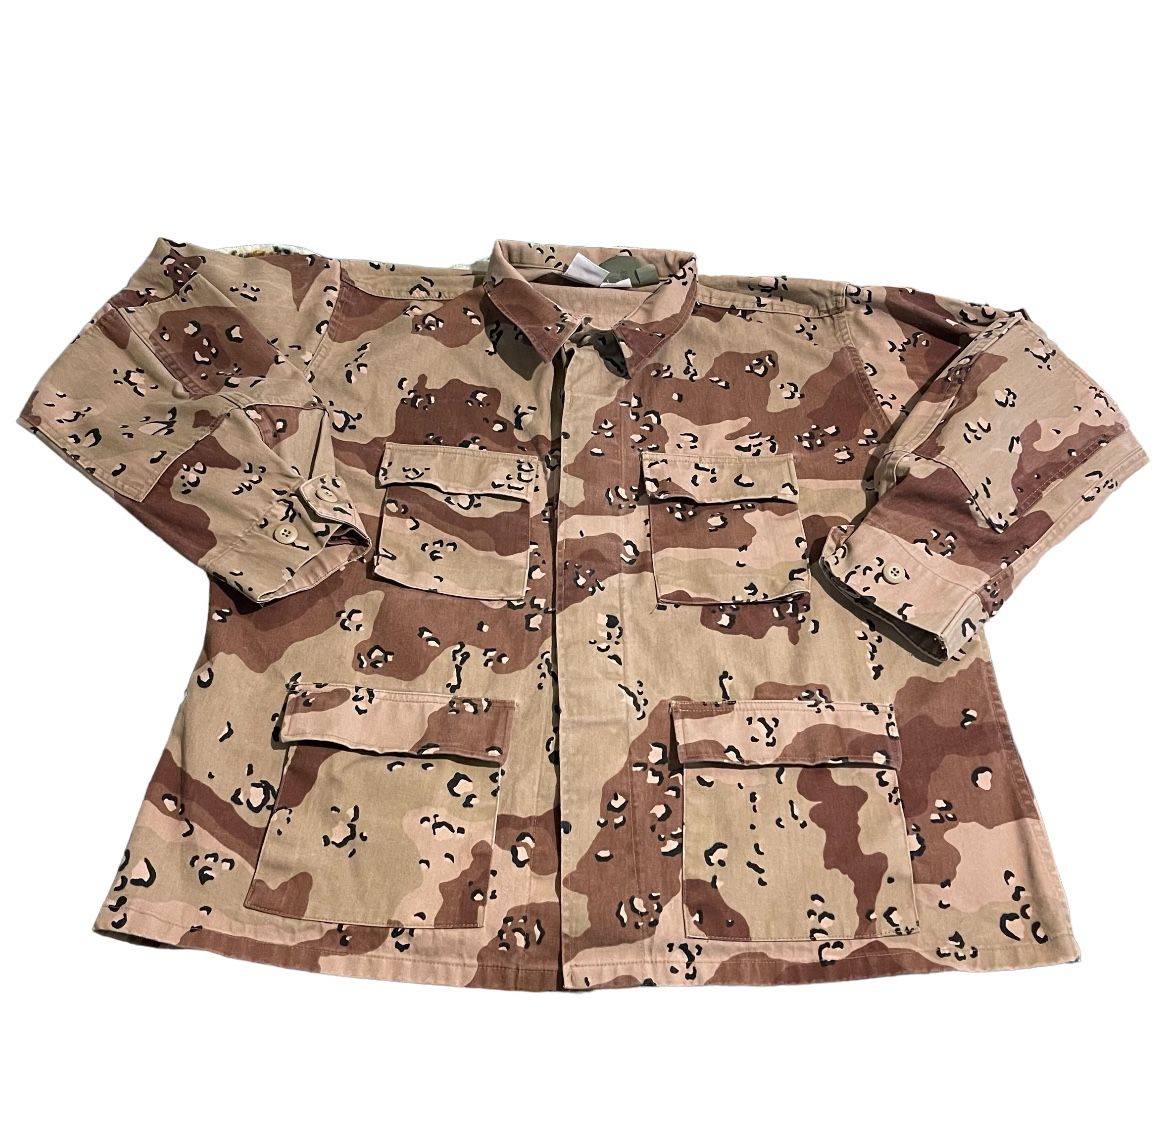 Propper Shirt Men XL Camouflage Button Down Outdoors Army Heavyweight Military